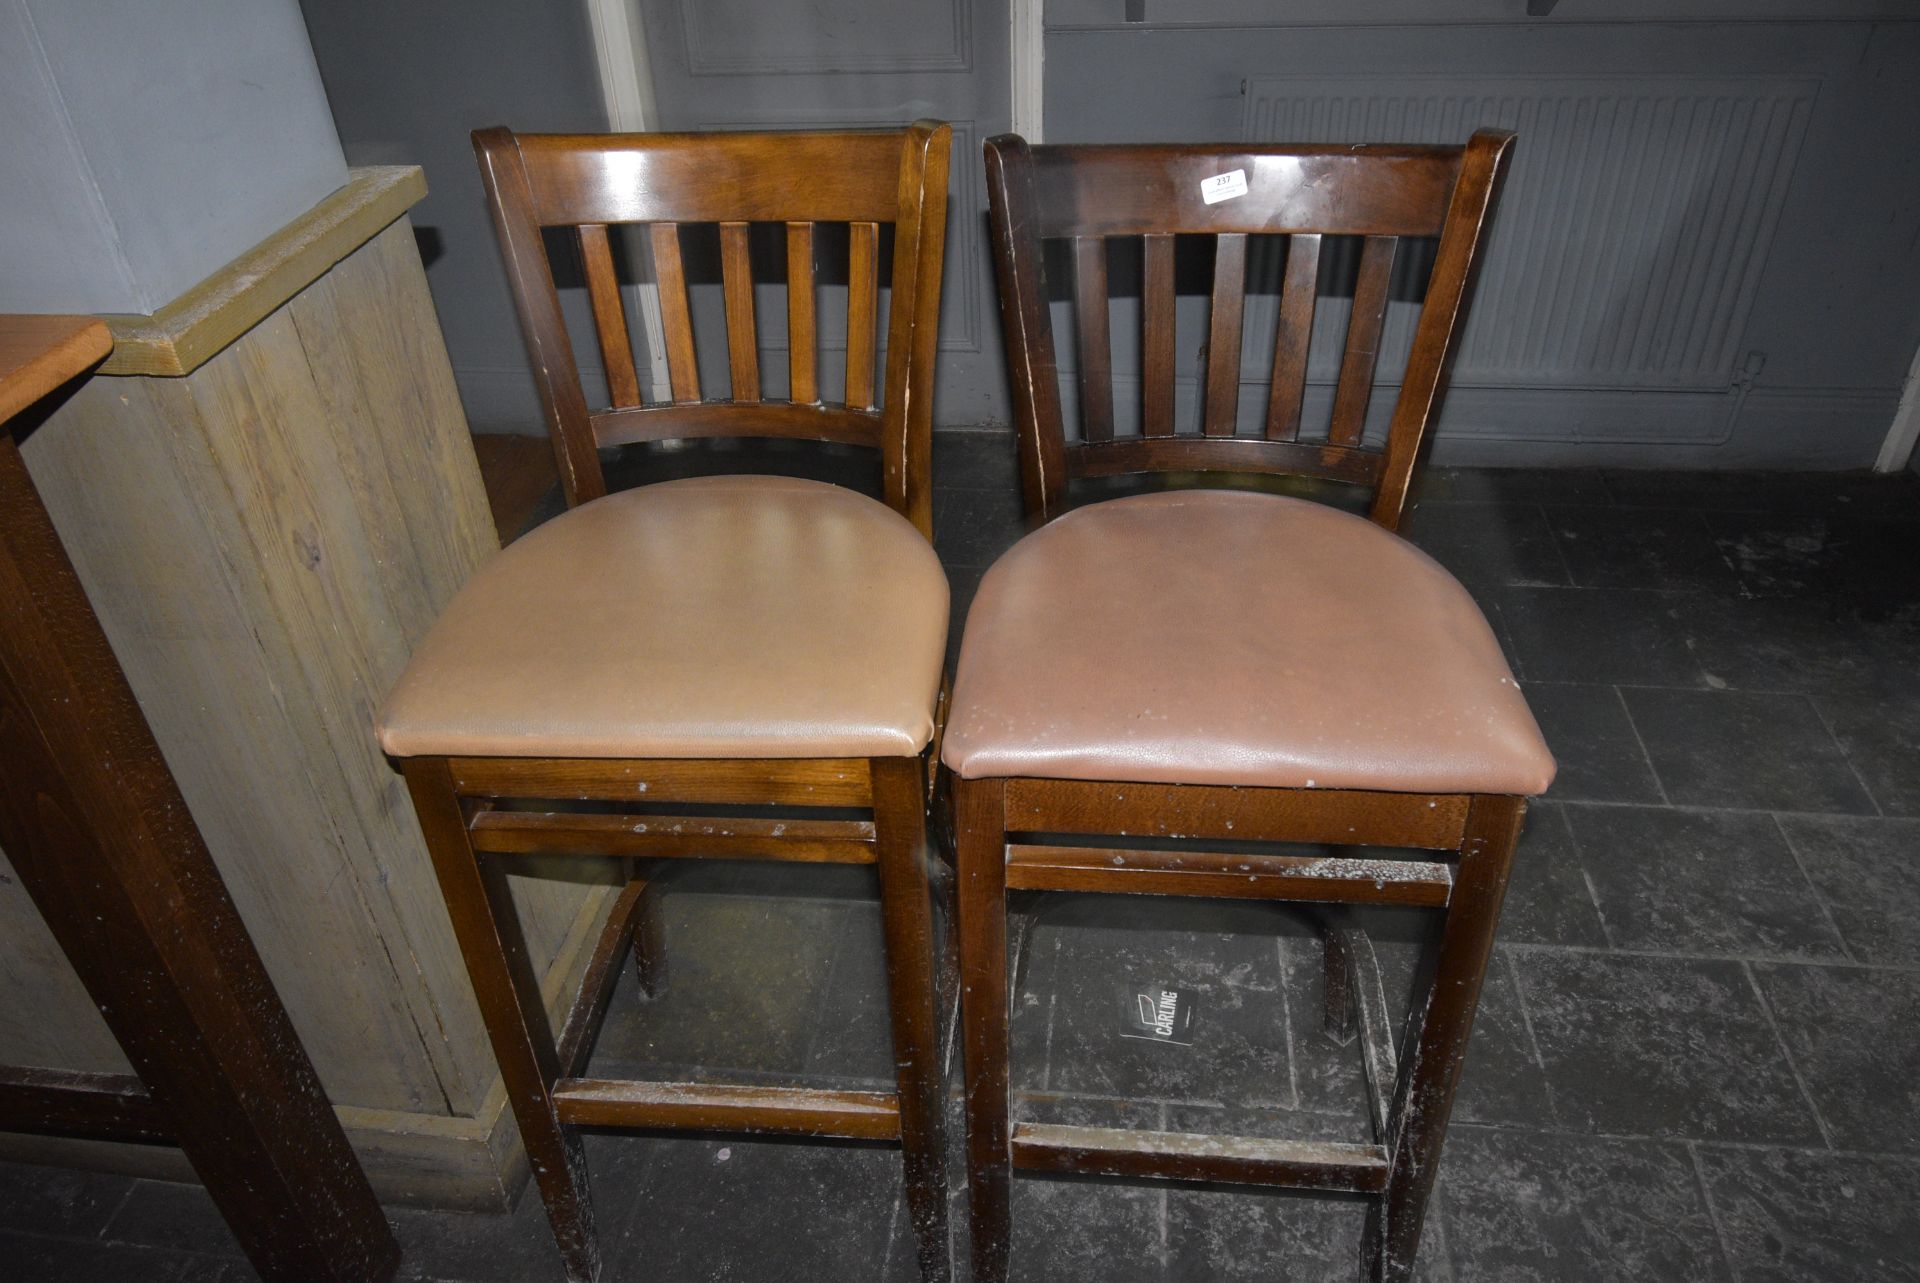 *Pair of Darkwood Framed Barstools with Upholstered Seats